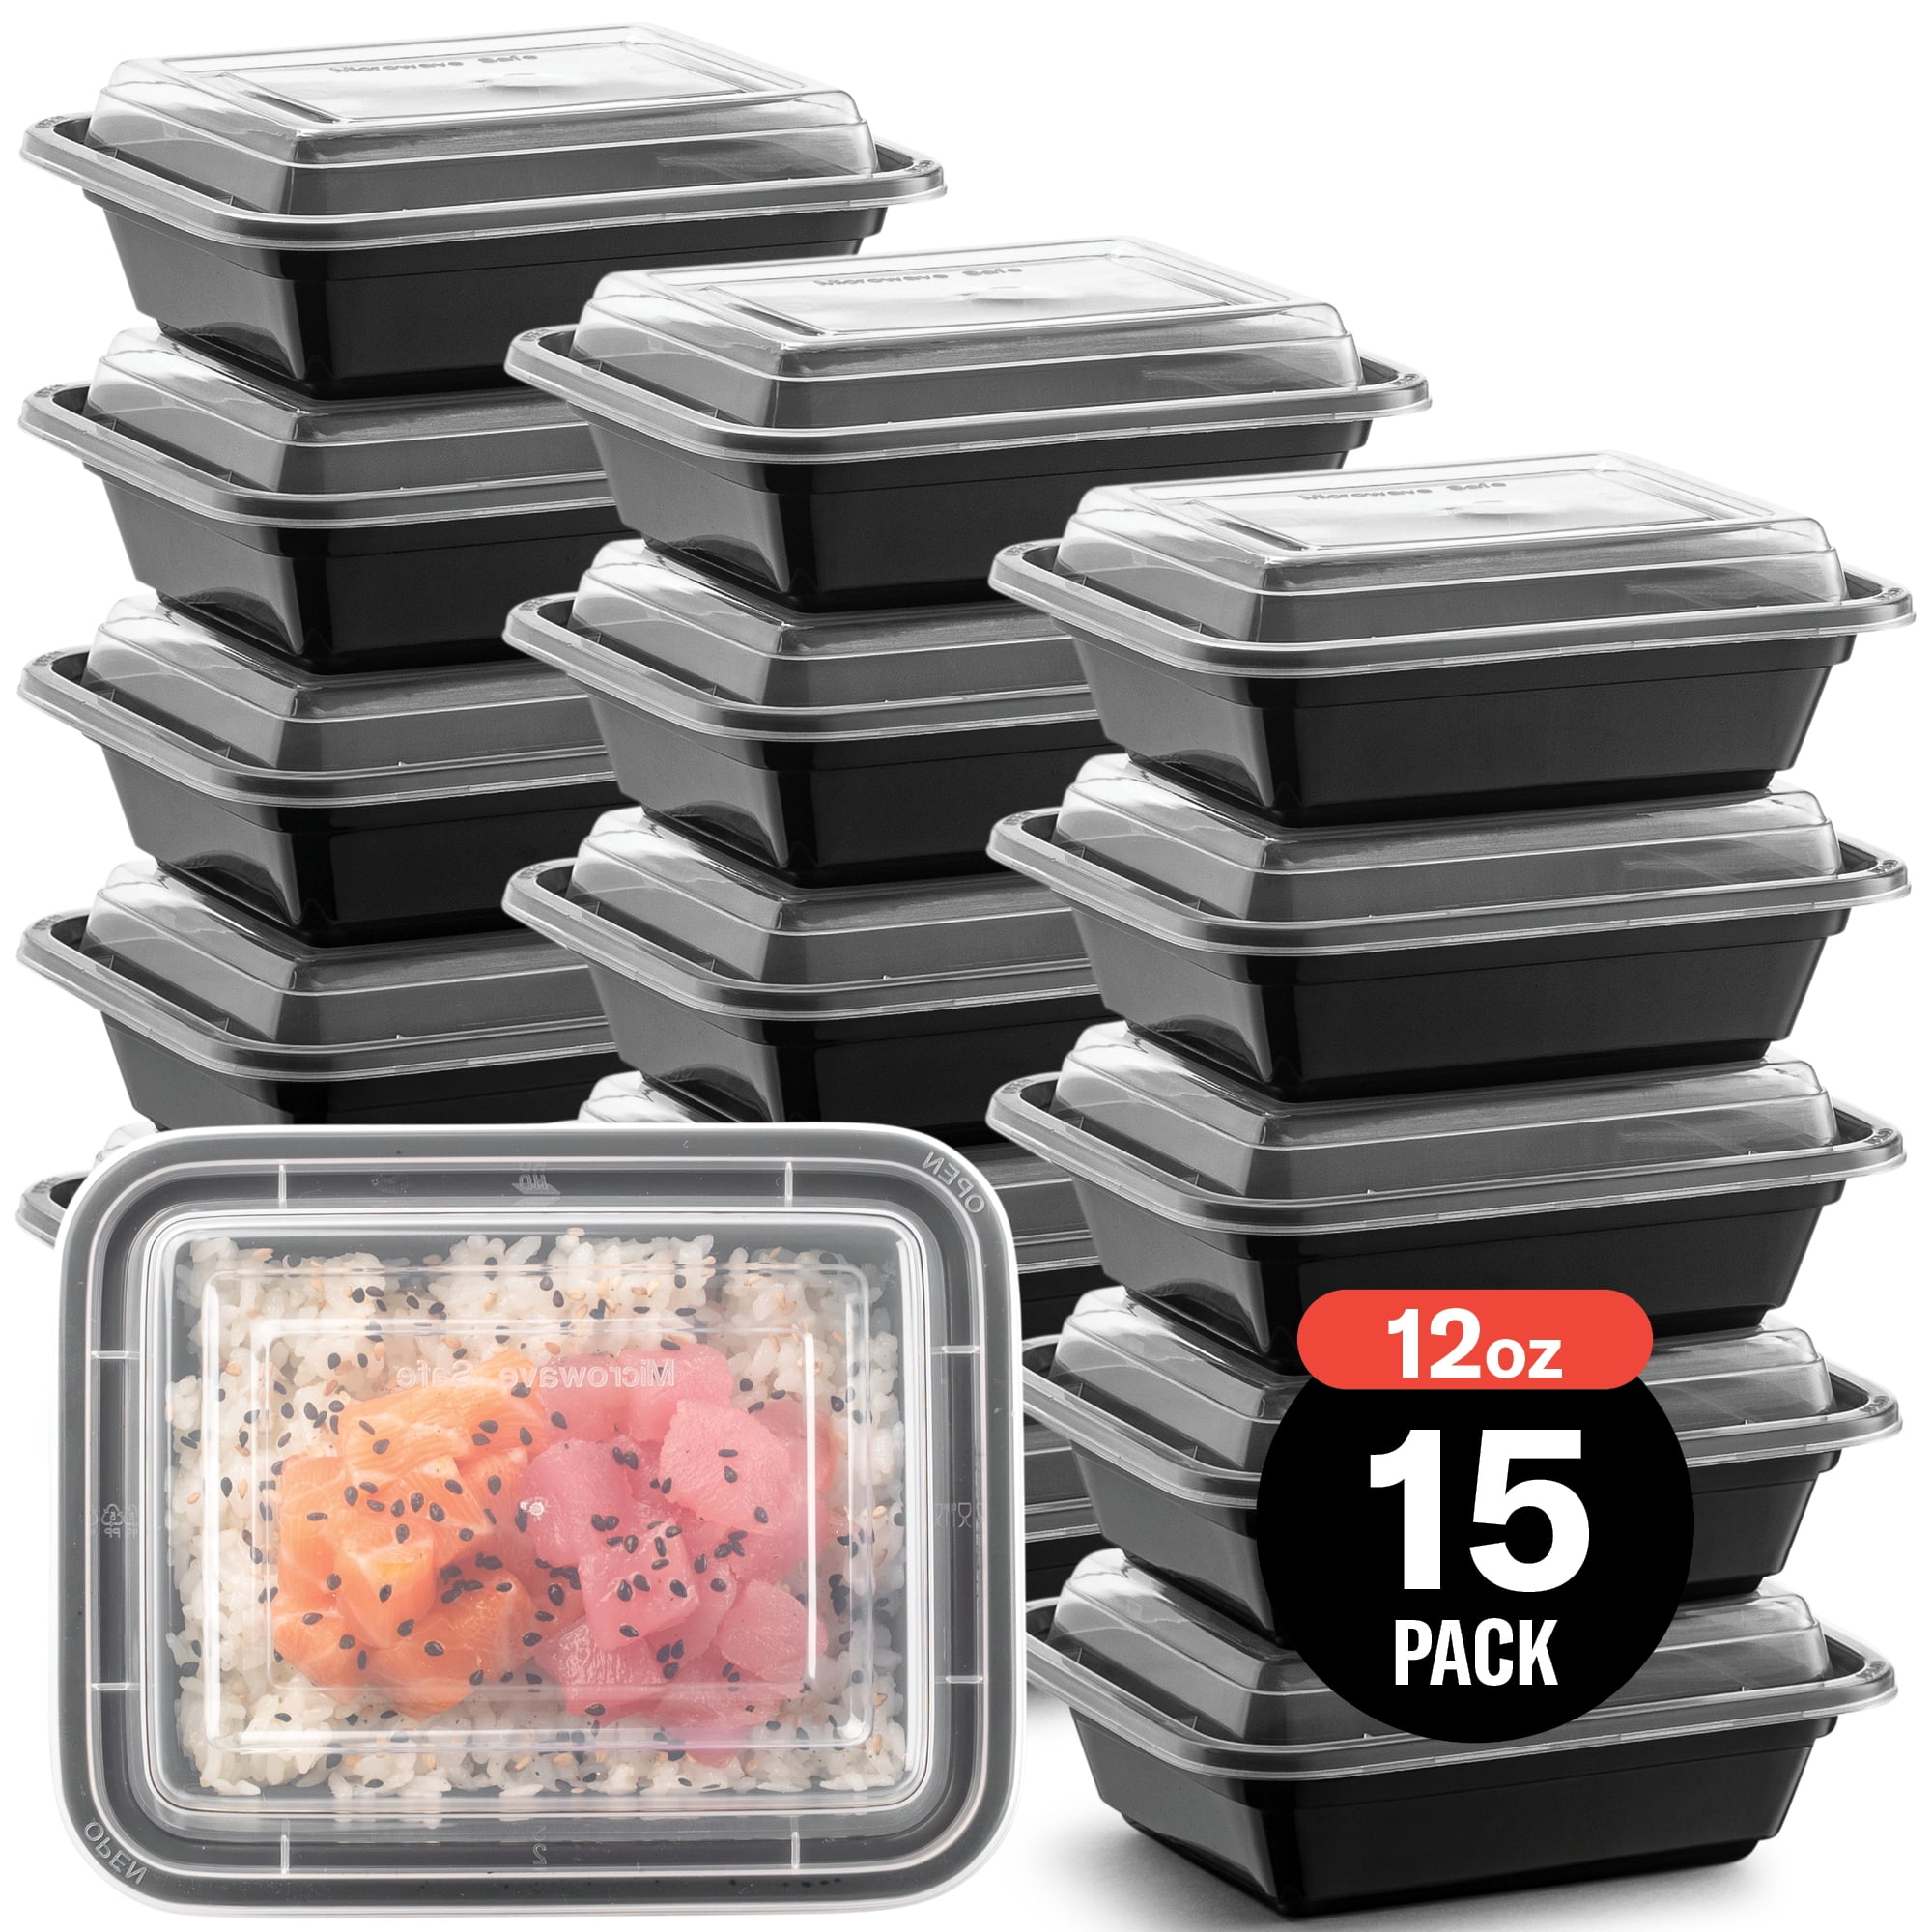  Igluu Meal Prep Round Plastic Containers - New Improved Lid -  Reusable BPA Free Food Containers with Airtight Lids - Microwavable,  Freezer and Dishwasher Safe - Stackable Salad Bowls - [10